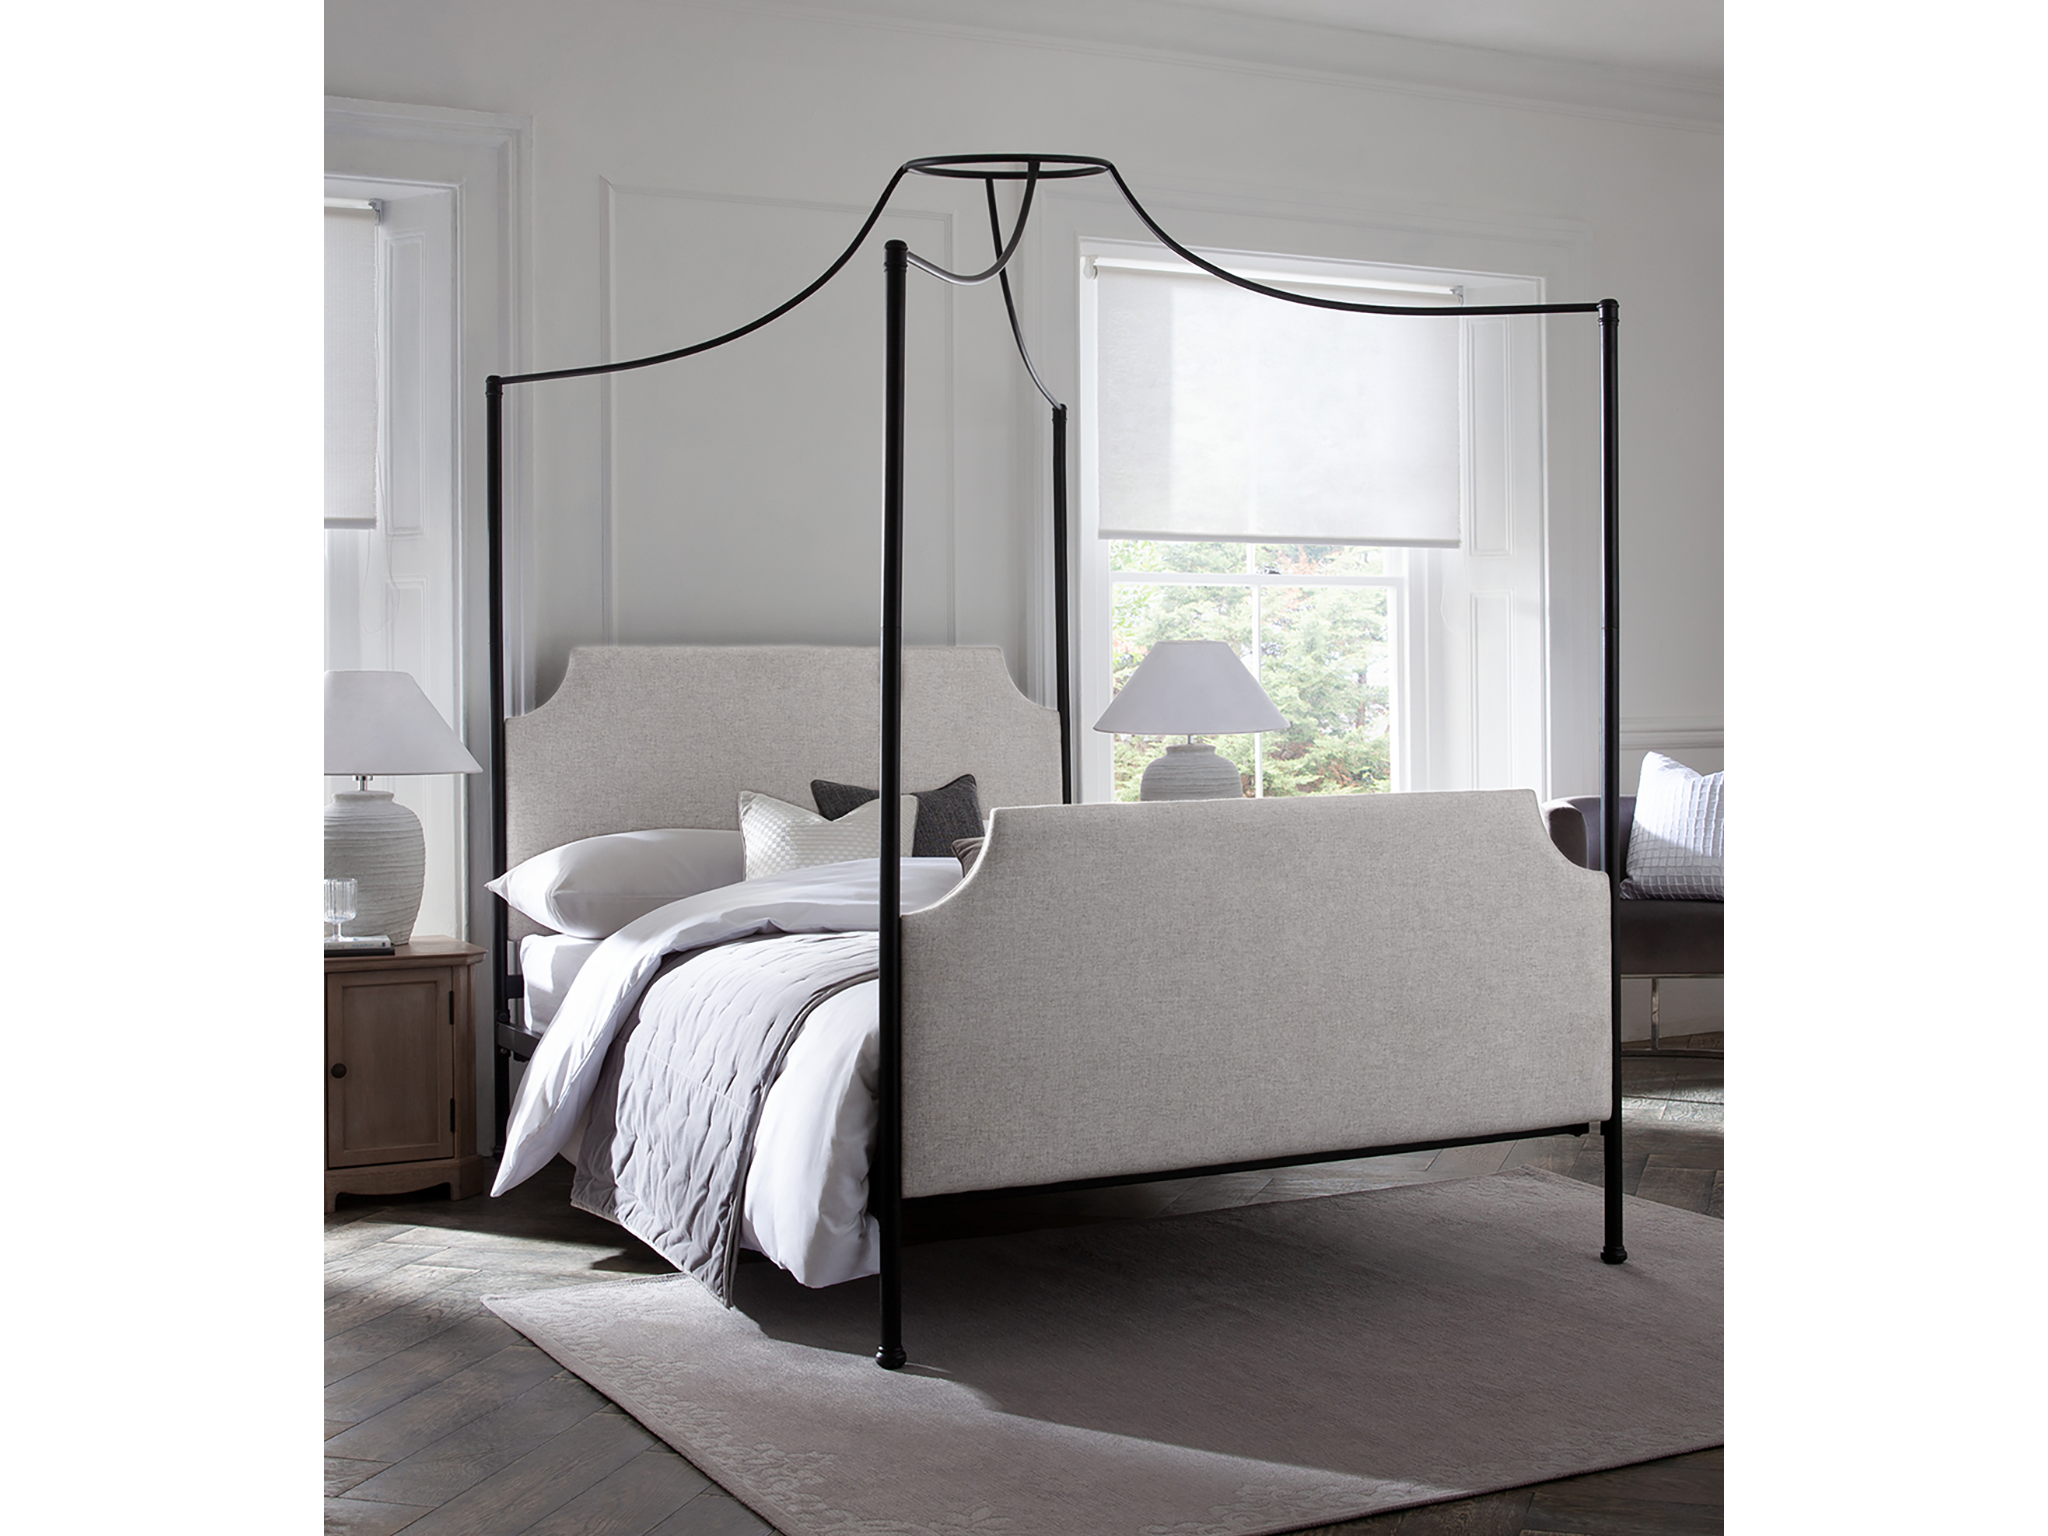 Next Isla metal 4 poster bed frame with upholstere